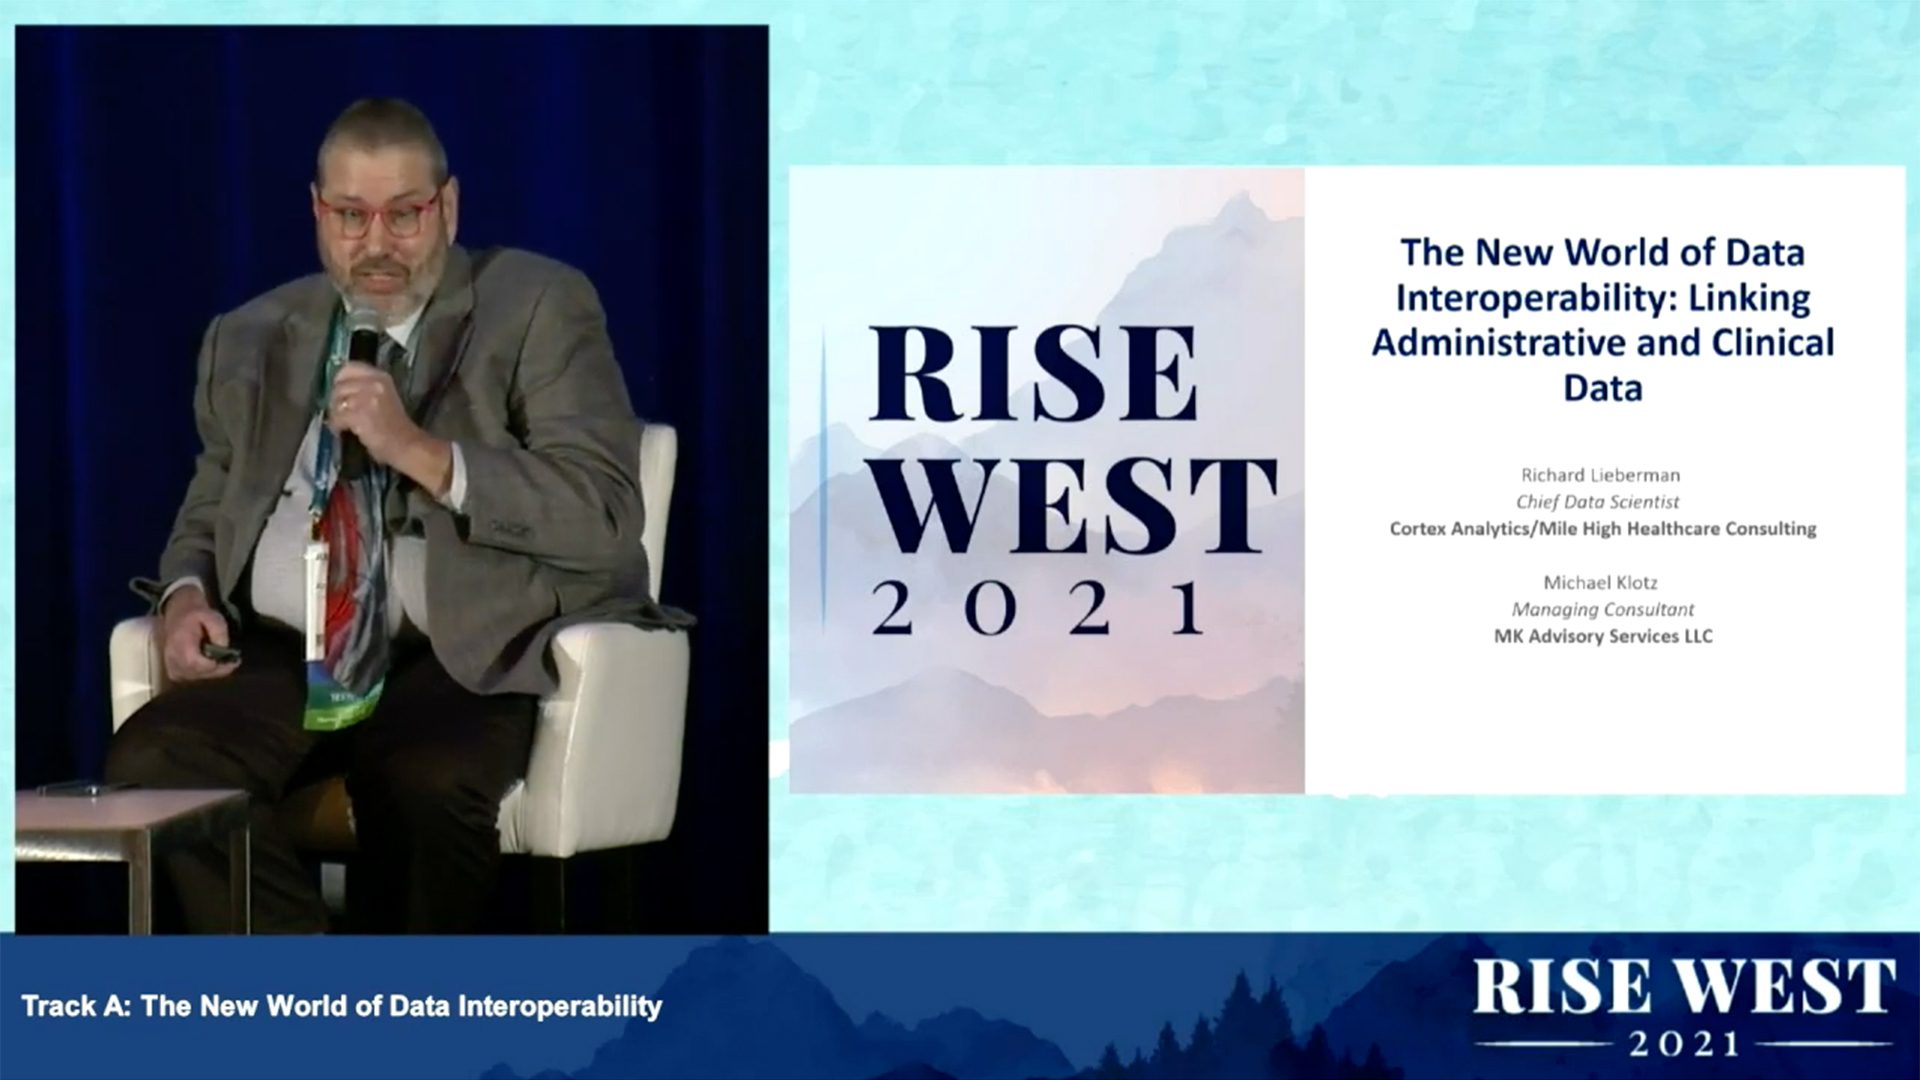 RISE West 2021: The New World of Data Interoperability: Linking Administrative and Clinical Data